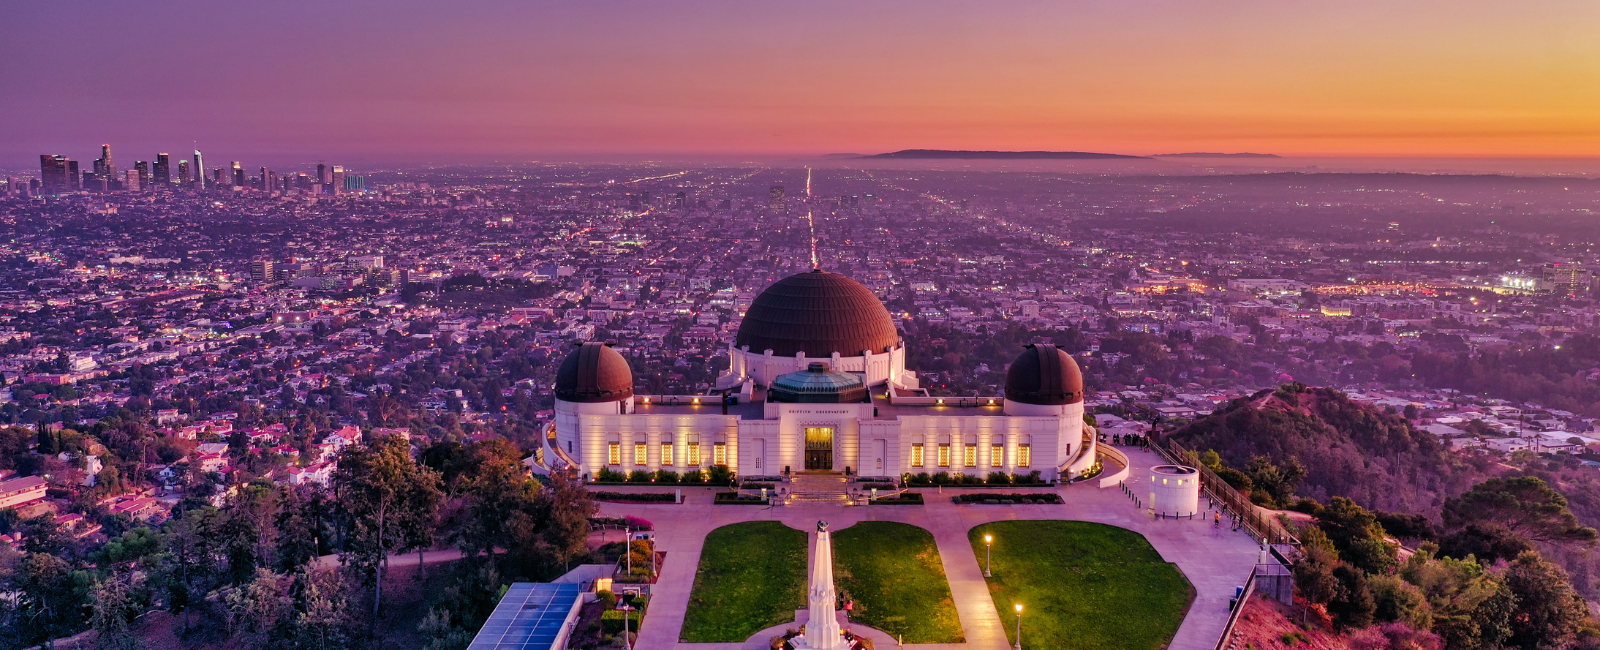 LA Griffith Observatory at sunsest 